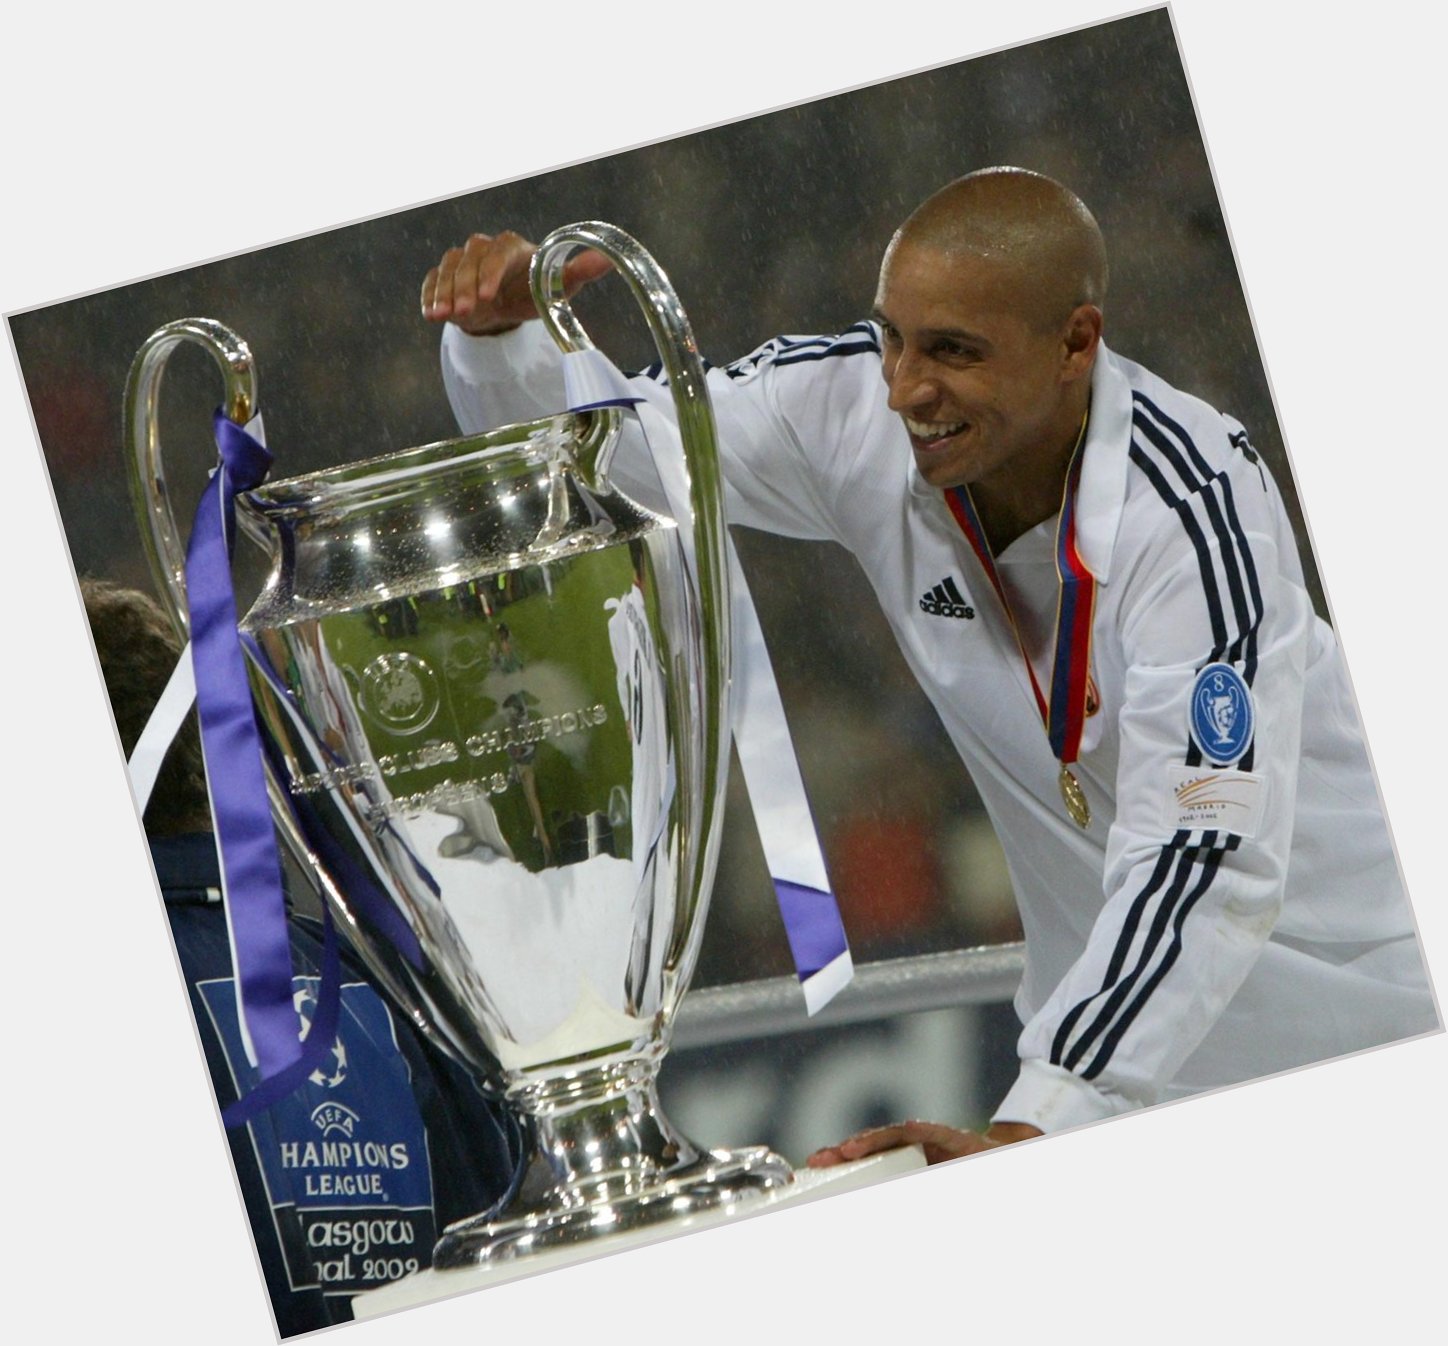 Happy 42nd birthday to Roberto Carlos. He scored 113 goals in 945 career games. Not bad for a left-back. 